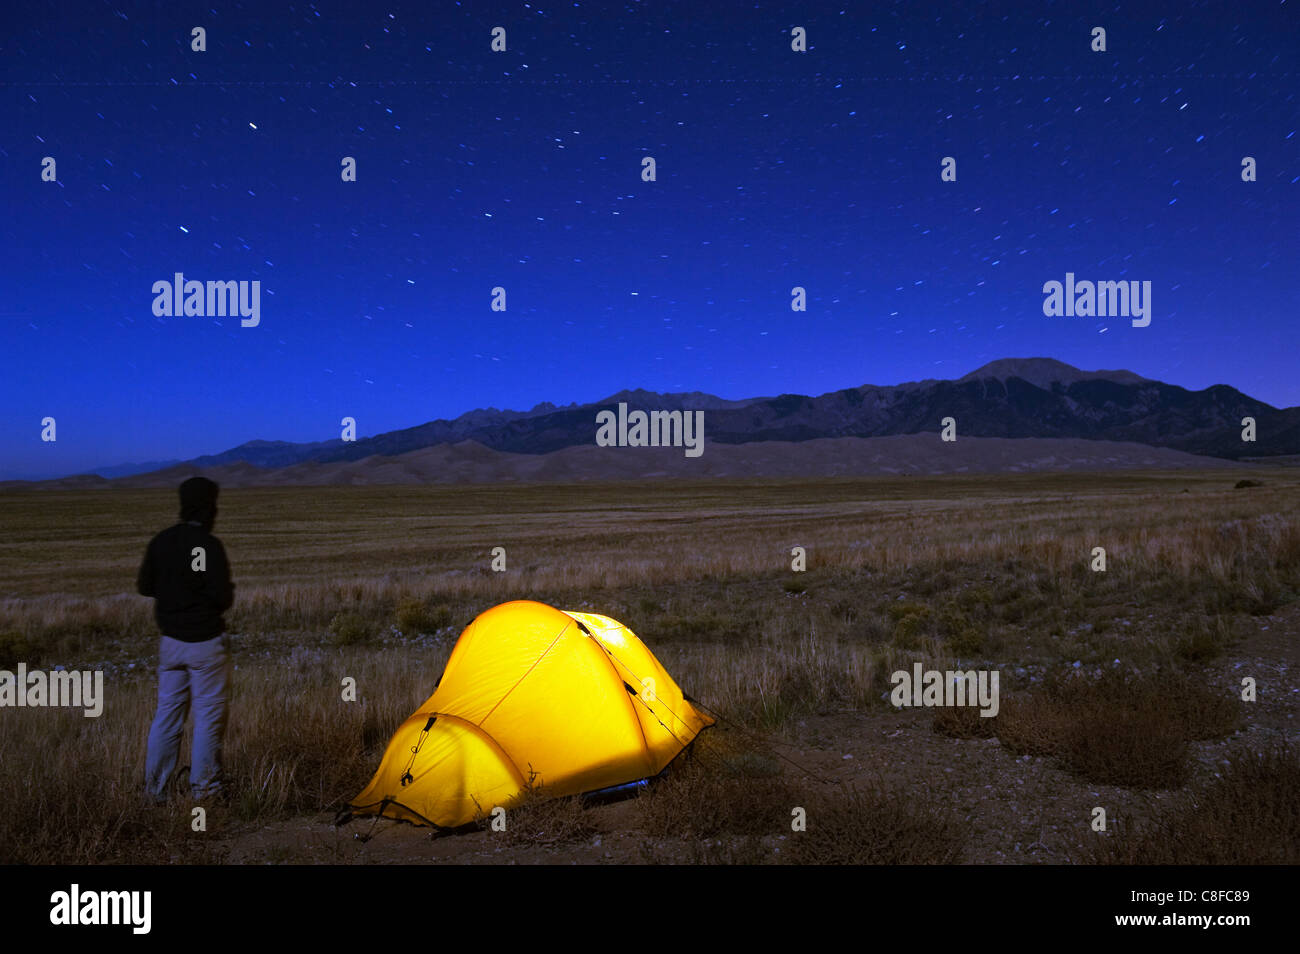 Hiker and tent illuminated under the night sky, Great Sand Dunes National Park, Colorado, United States of America Stock Photo